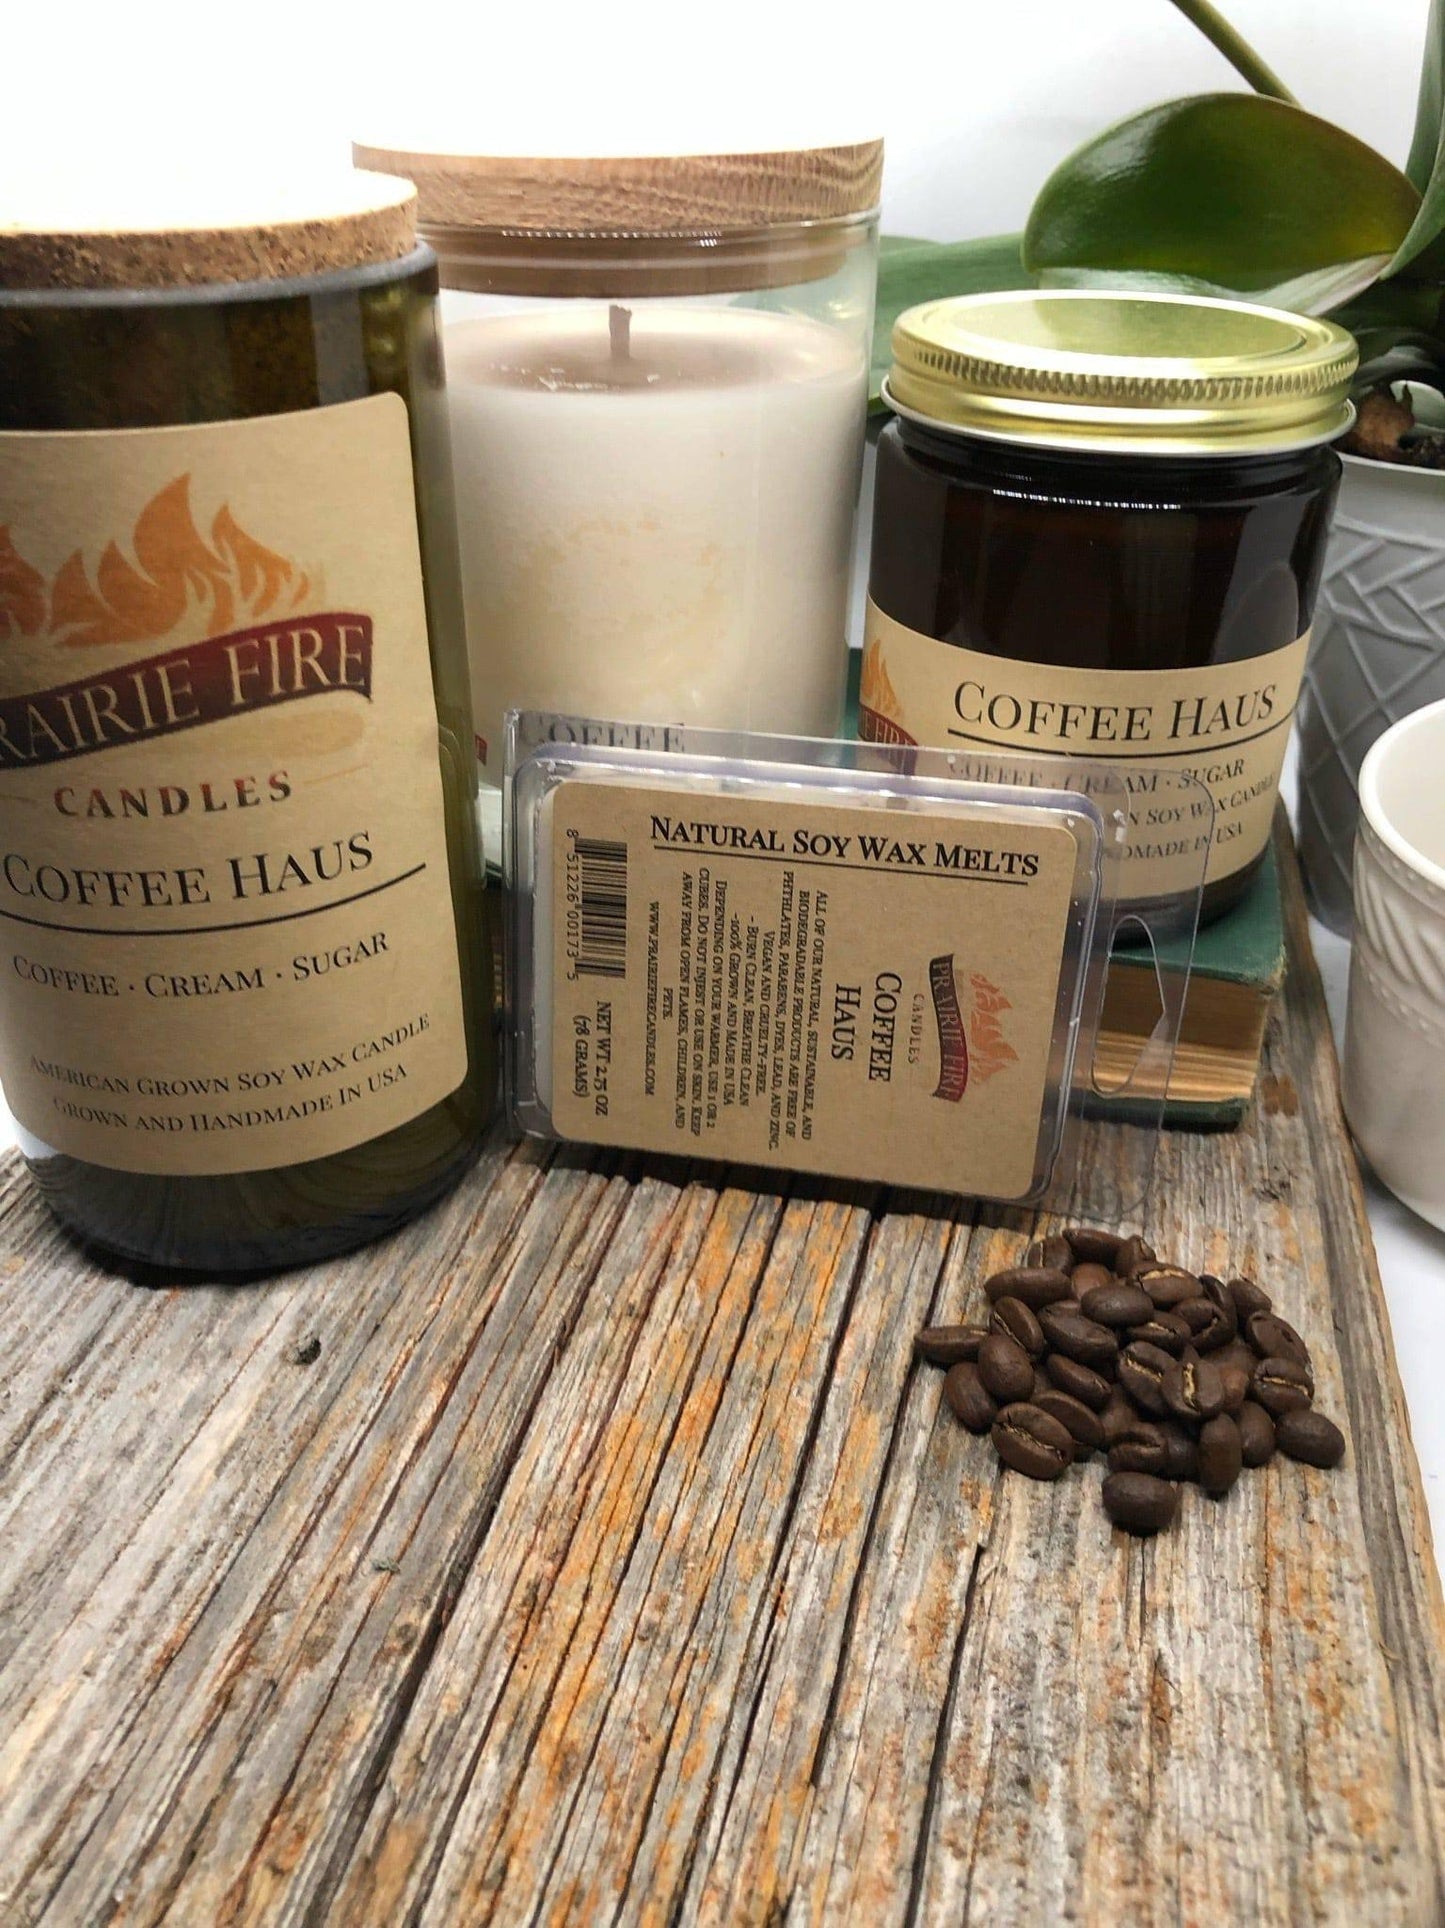 Coffee Haus Soy Wax Candle | Repurposed Wine Bottle Candle Natural Cork | Handmade in USA Candle | Eco-Friendly Candle | Non-Toxic Soy Candle - Prairie Fire Candles